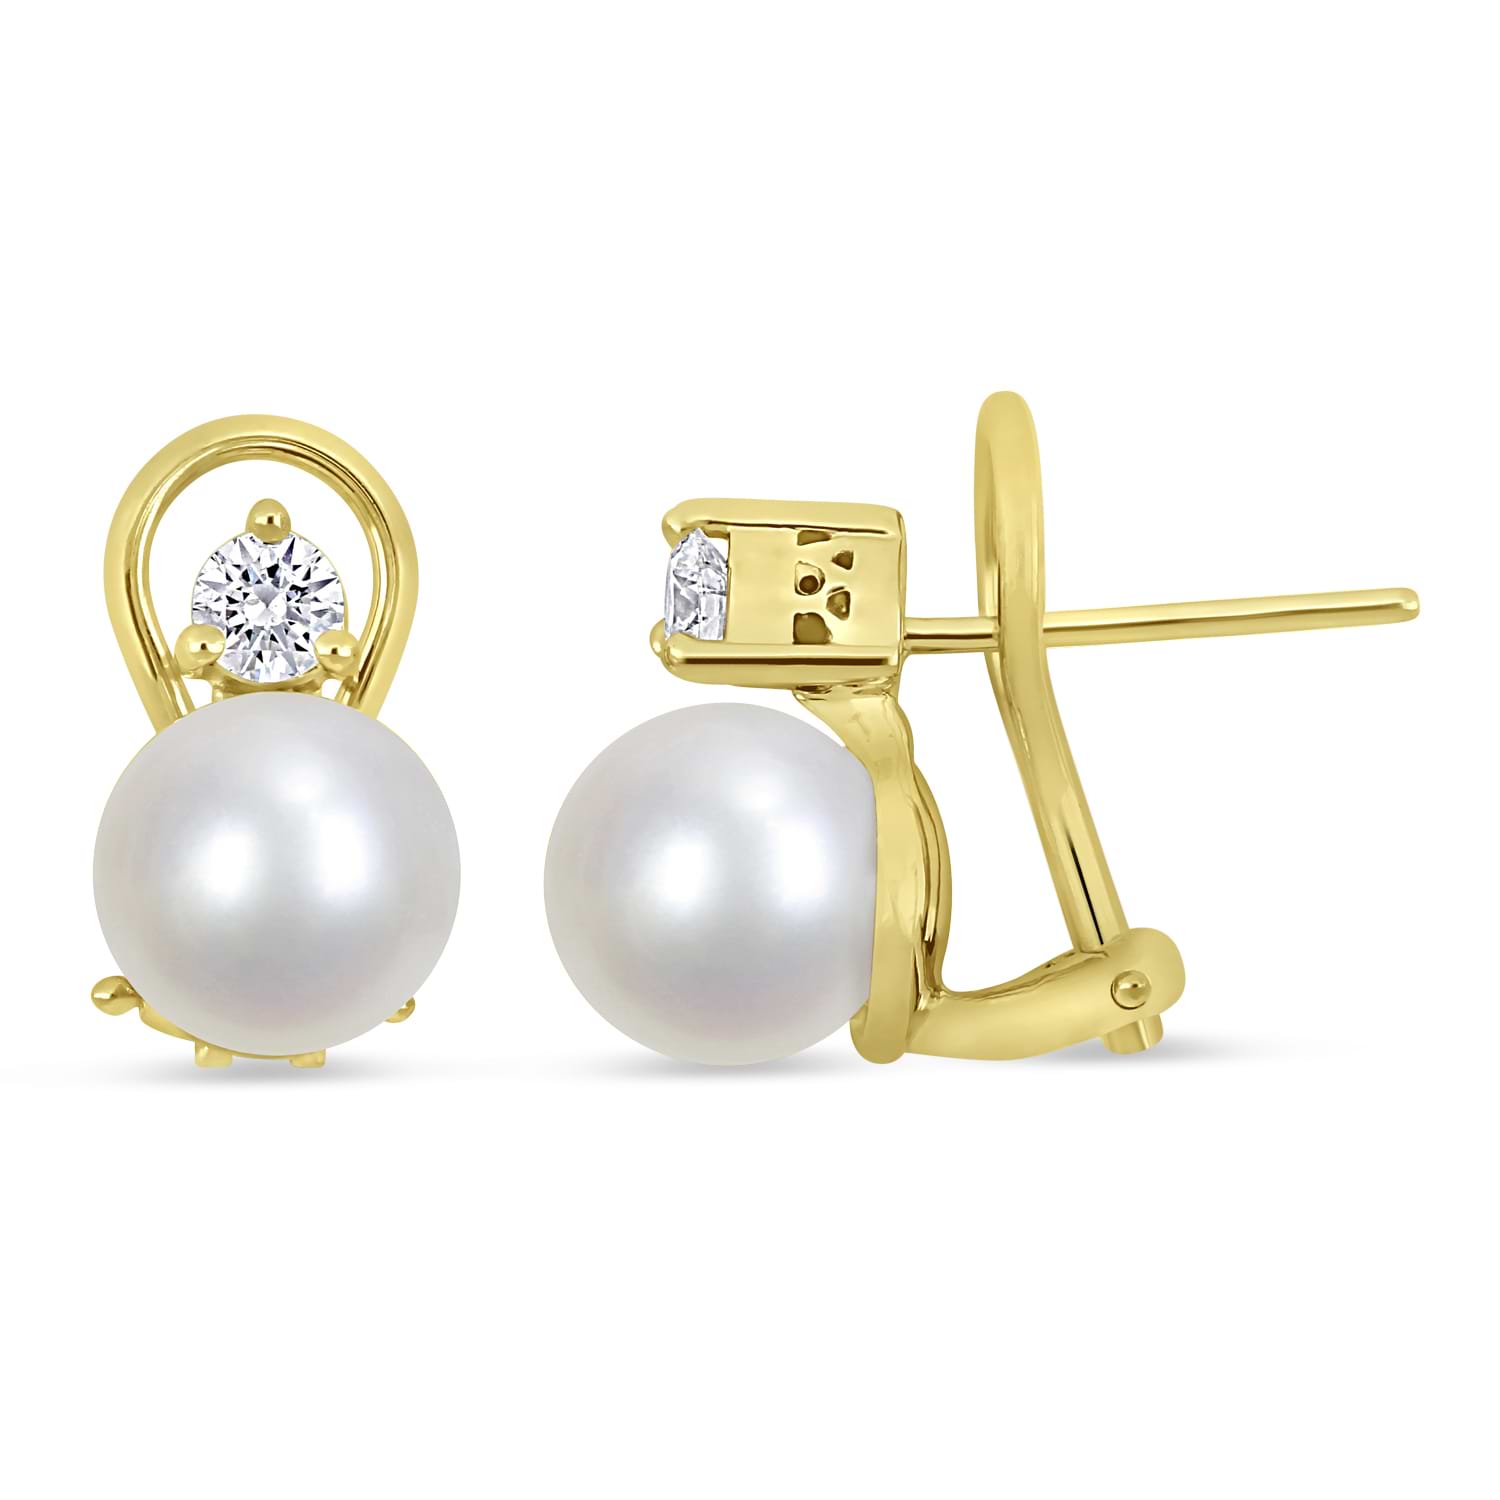 Round Akoya Cultured White Pearl and Diamond Clip Back Earrings 14k Yellow Gold (0.30 ct)